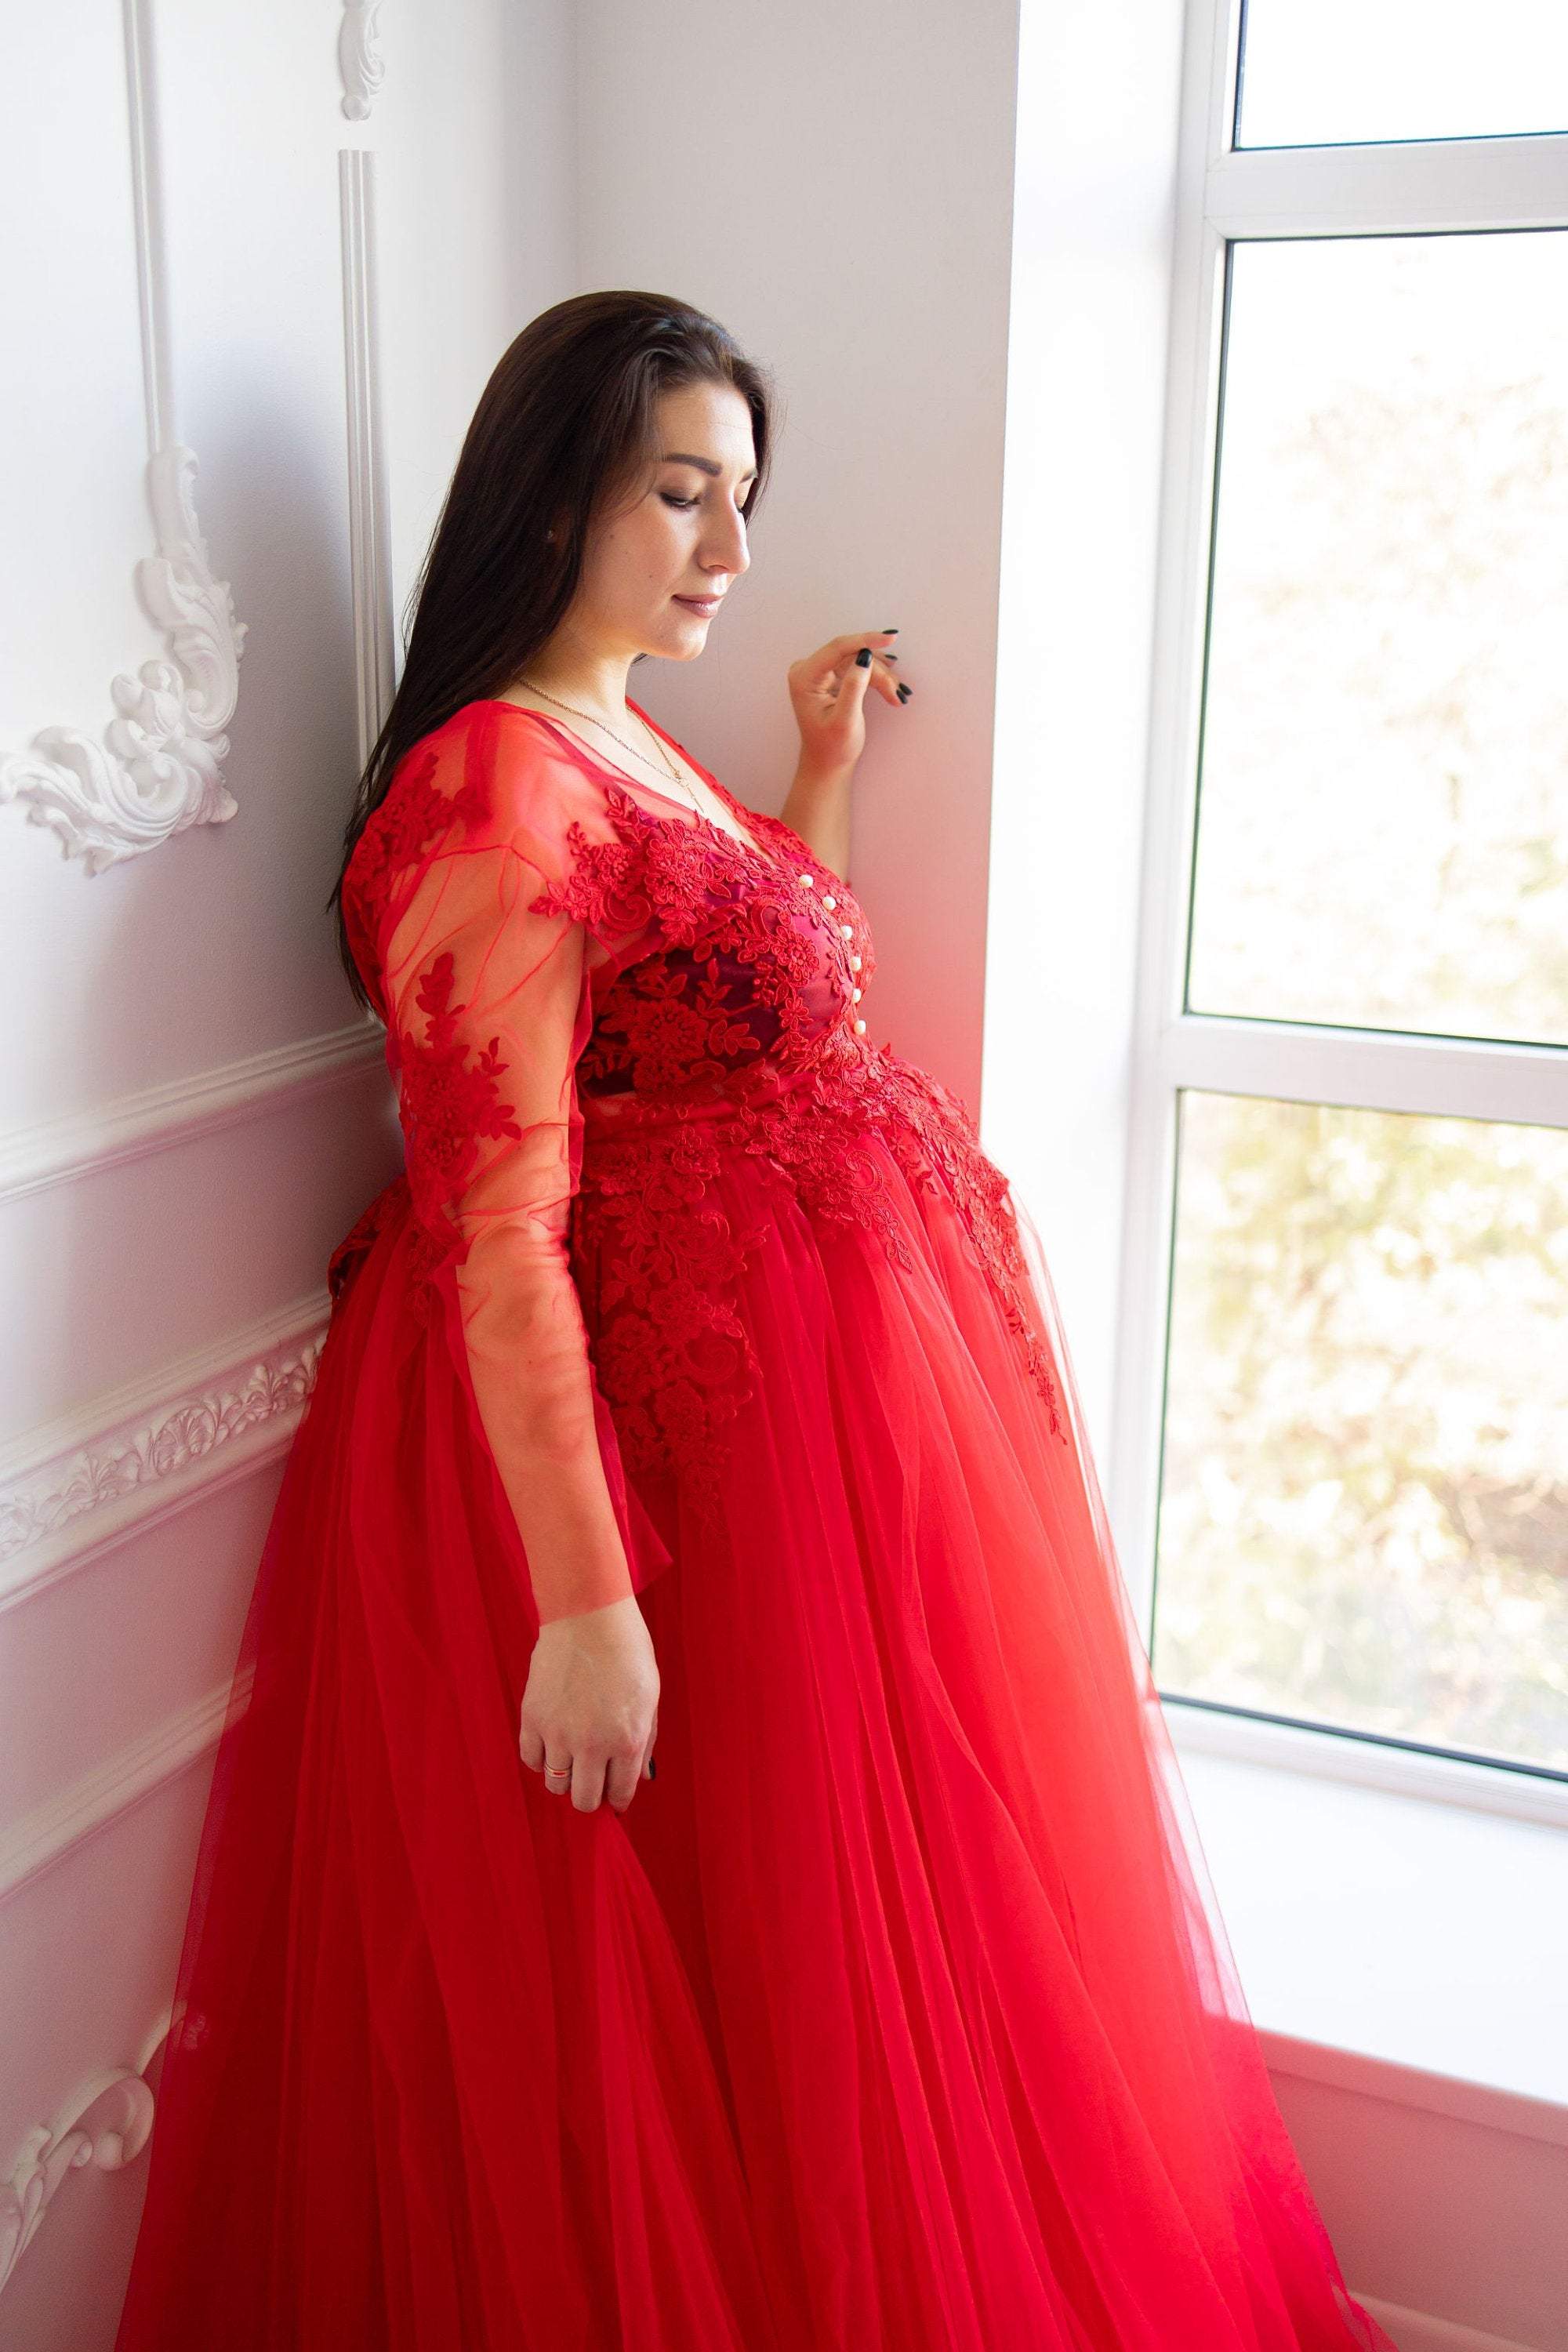 Red Maternity Gown, Red Pregnancy Maternity Photoshoot Dress, T